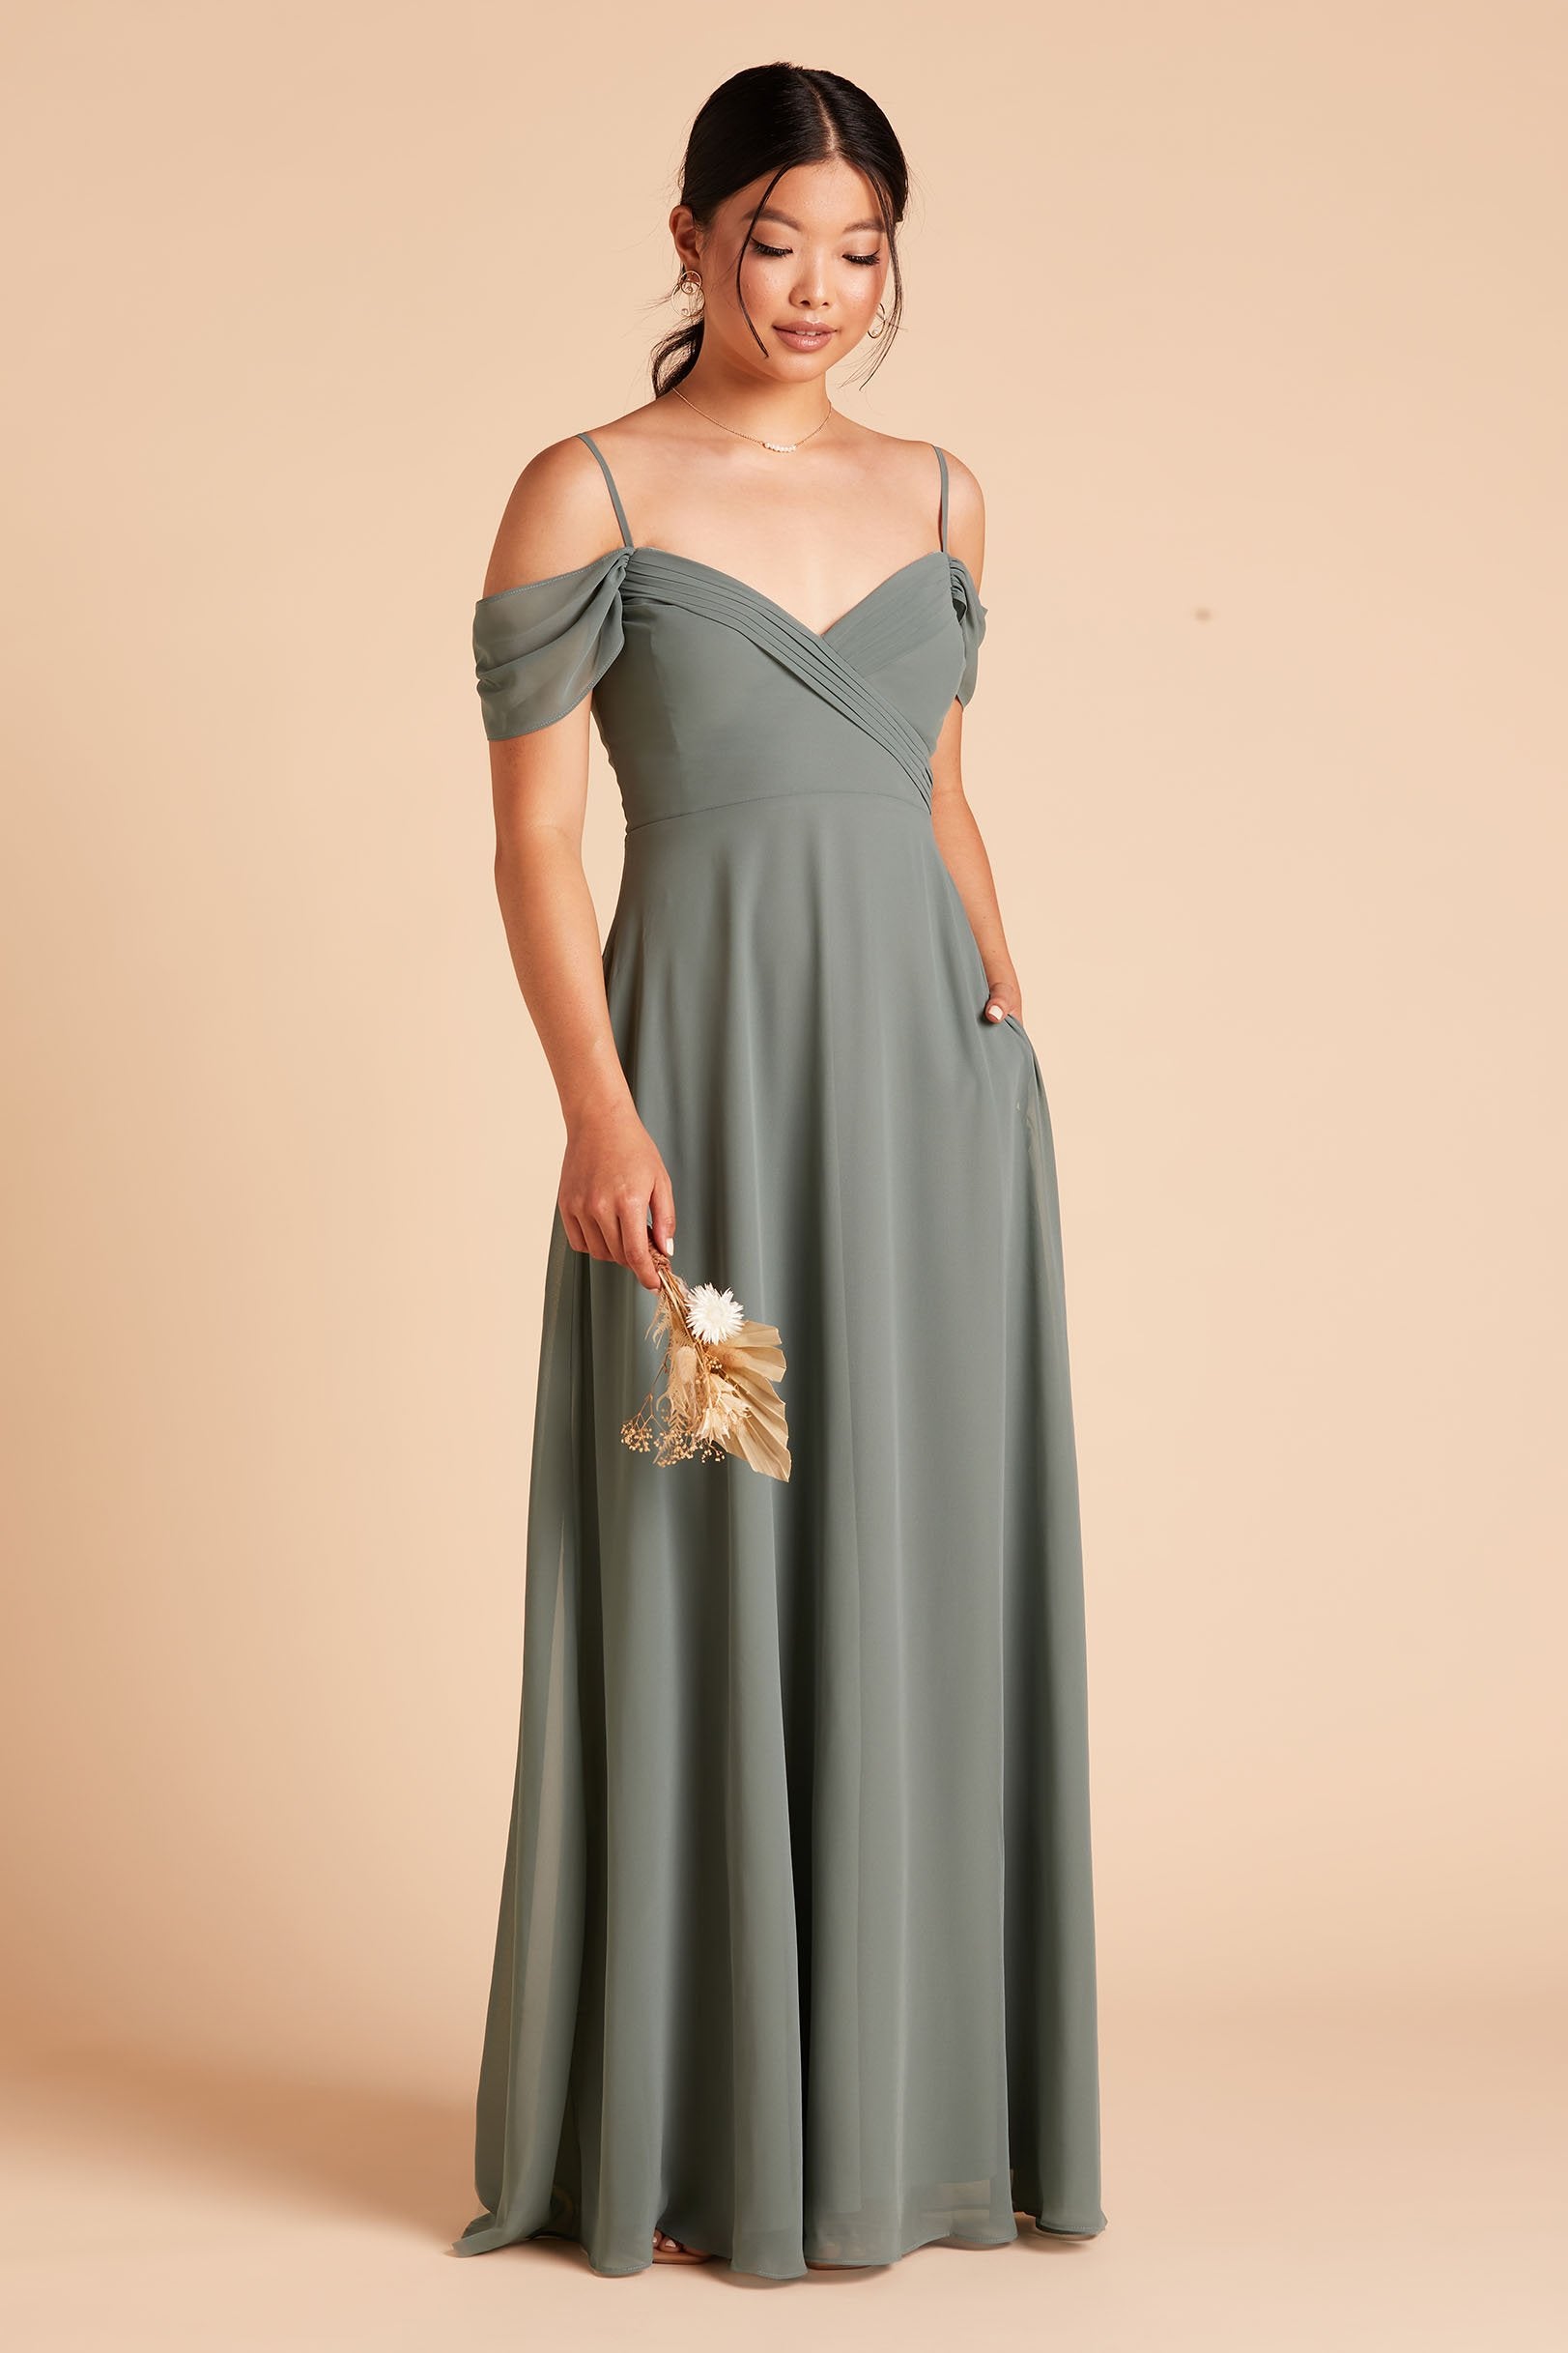 Spence convertible bridesmaid dress in sea glass green chiffon by Birdy Grey, side view with hand in pocket